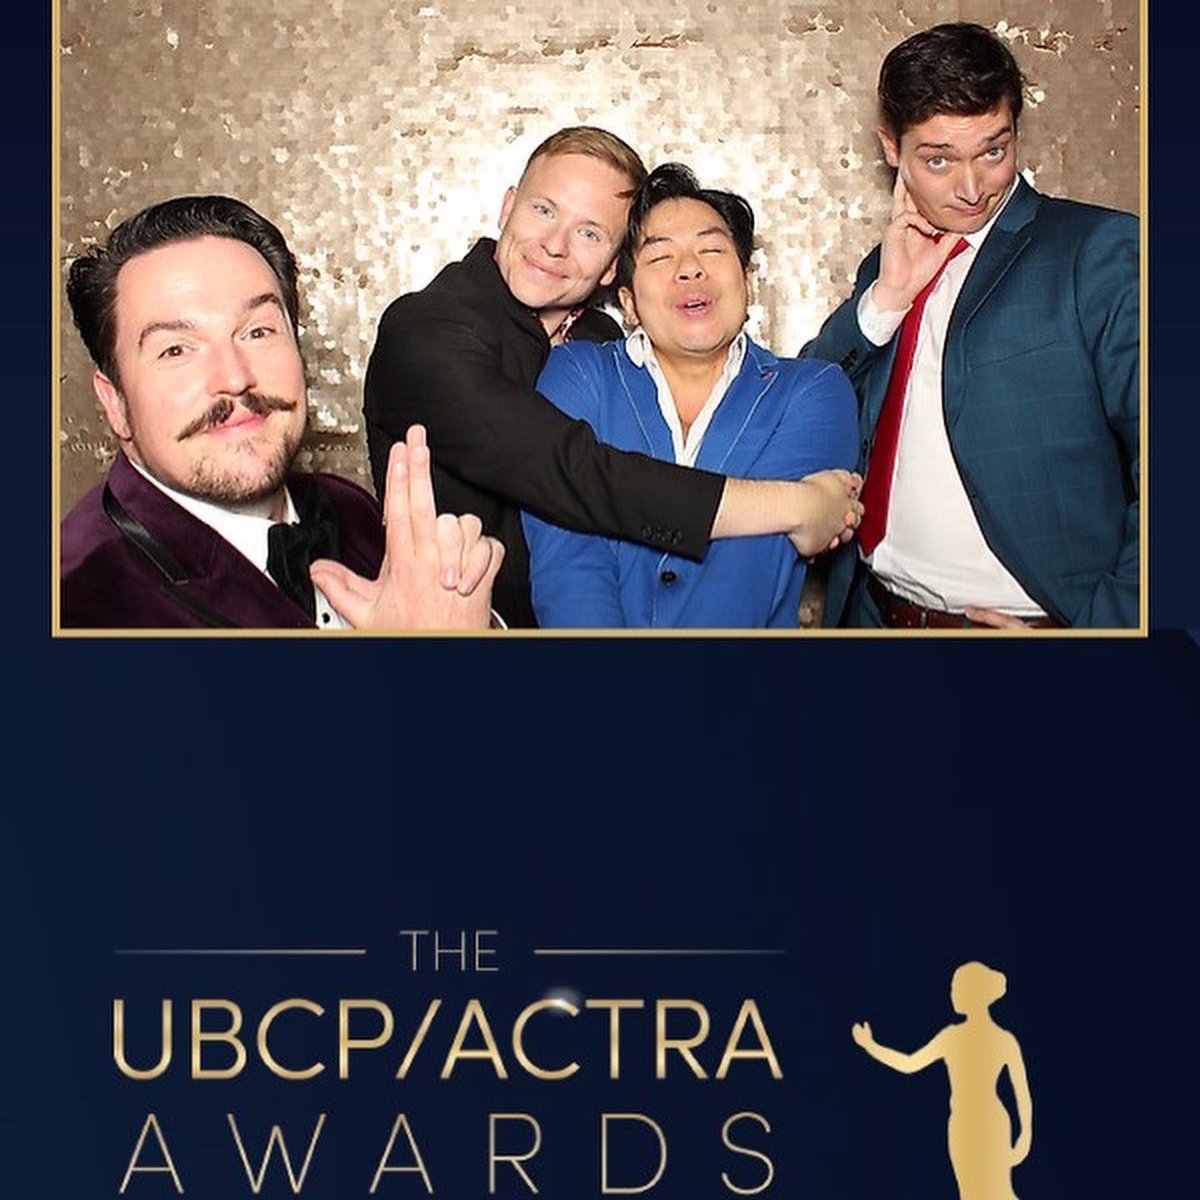 I LOVE MY #VOICEOVER COMMUNITY!💕 Honoured to be nominated w these world class talents! HUGE congratulations to @ianhanlin  A well deserved win! I learn from U everytime we’re in the booth Thx @UBCP_ACTRA for throwing a great party! #ubcp #ubcpactra #ubcpactraawards #voiceactor